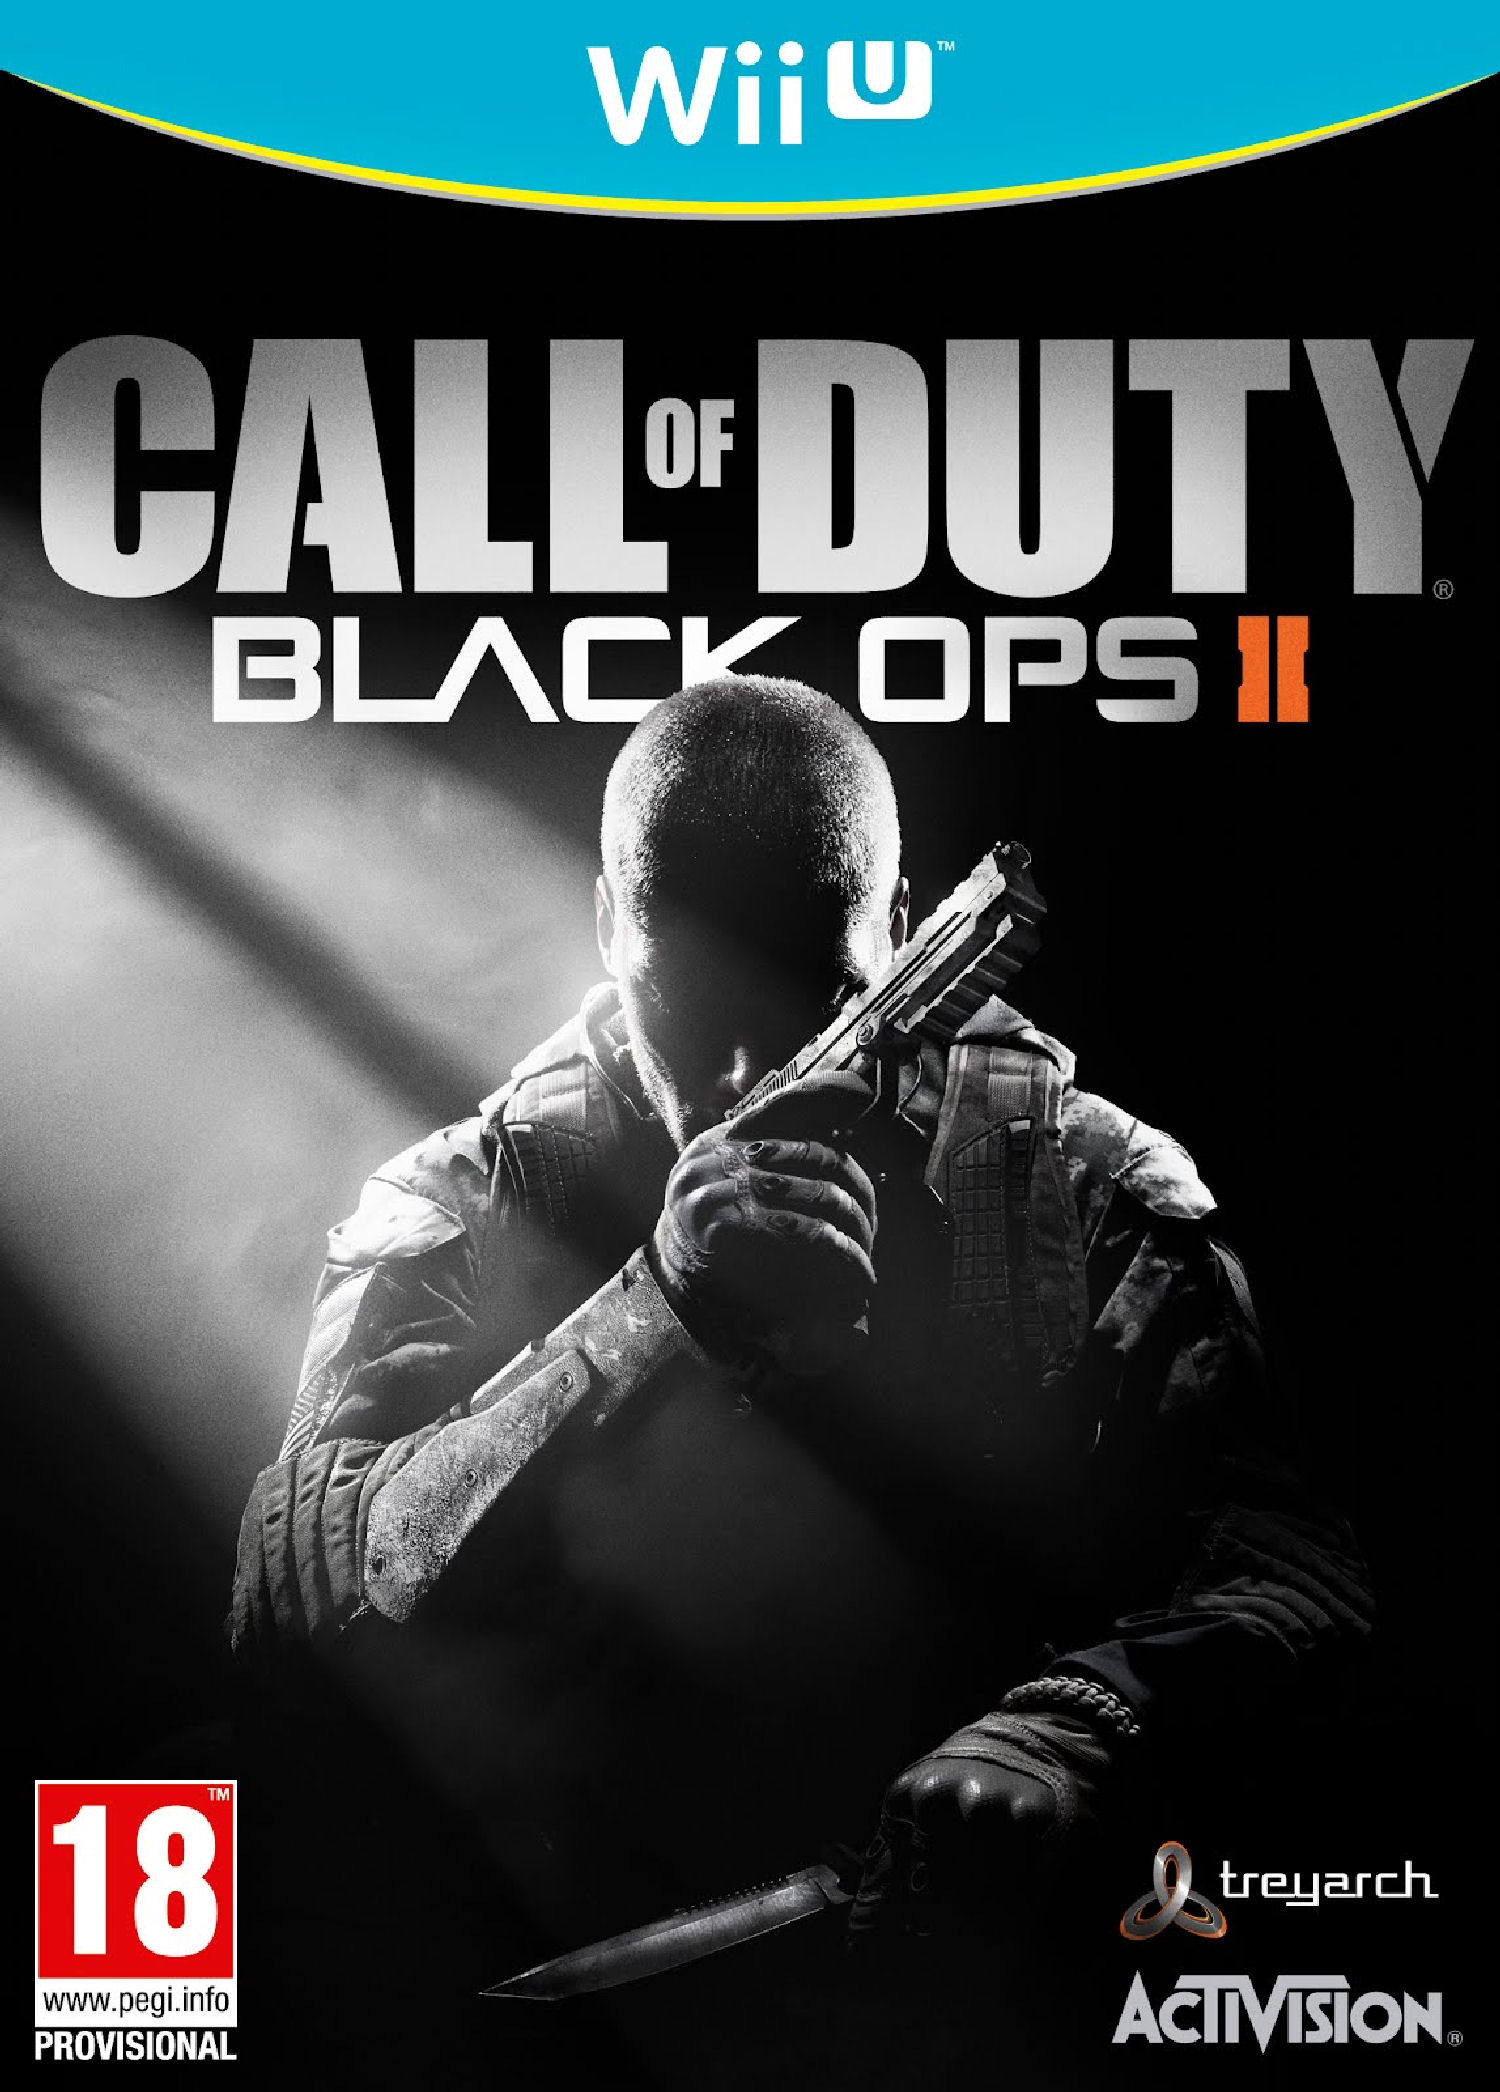 Activision Call of Duty Black Ops 2 Nintendo Wii U